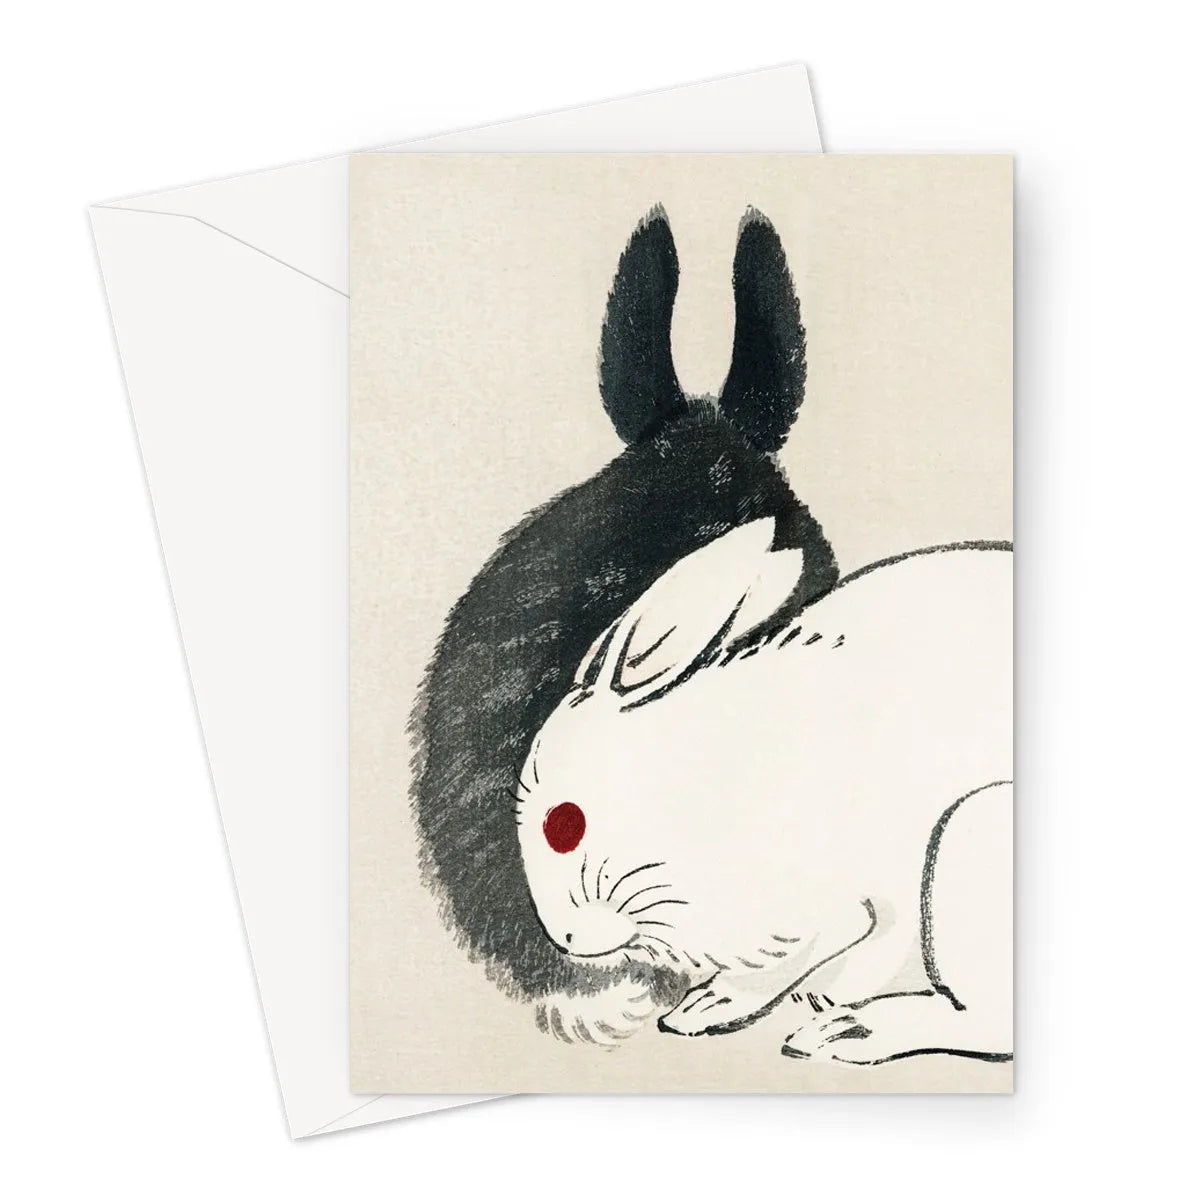 Black And White Rabbit By Kōno Bairei Greeting Card - A5 Portrait / 1 Card - Greeting & Note Cards - Aesthetic Art